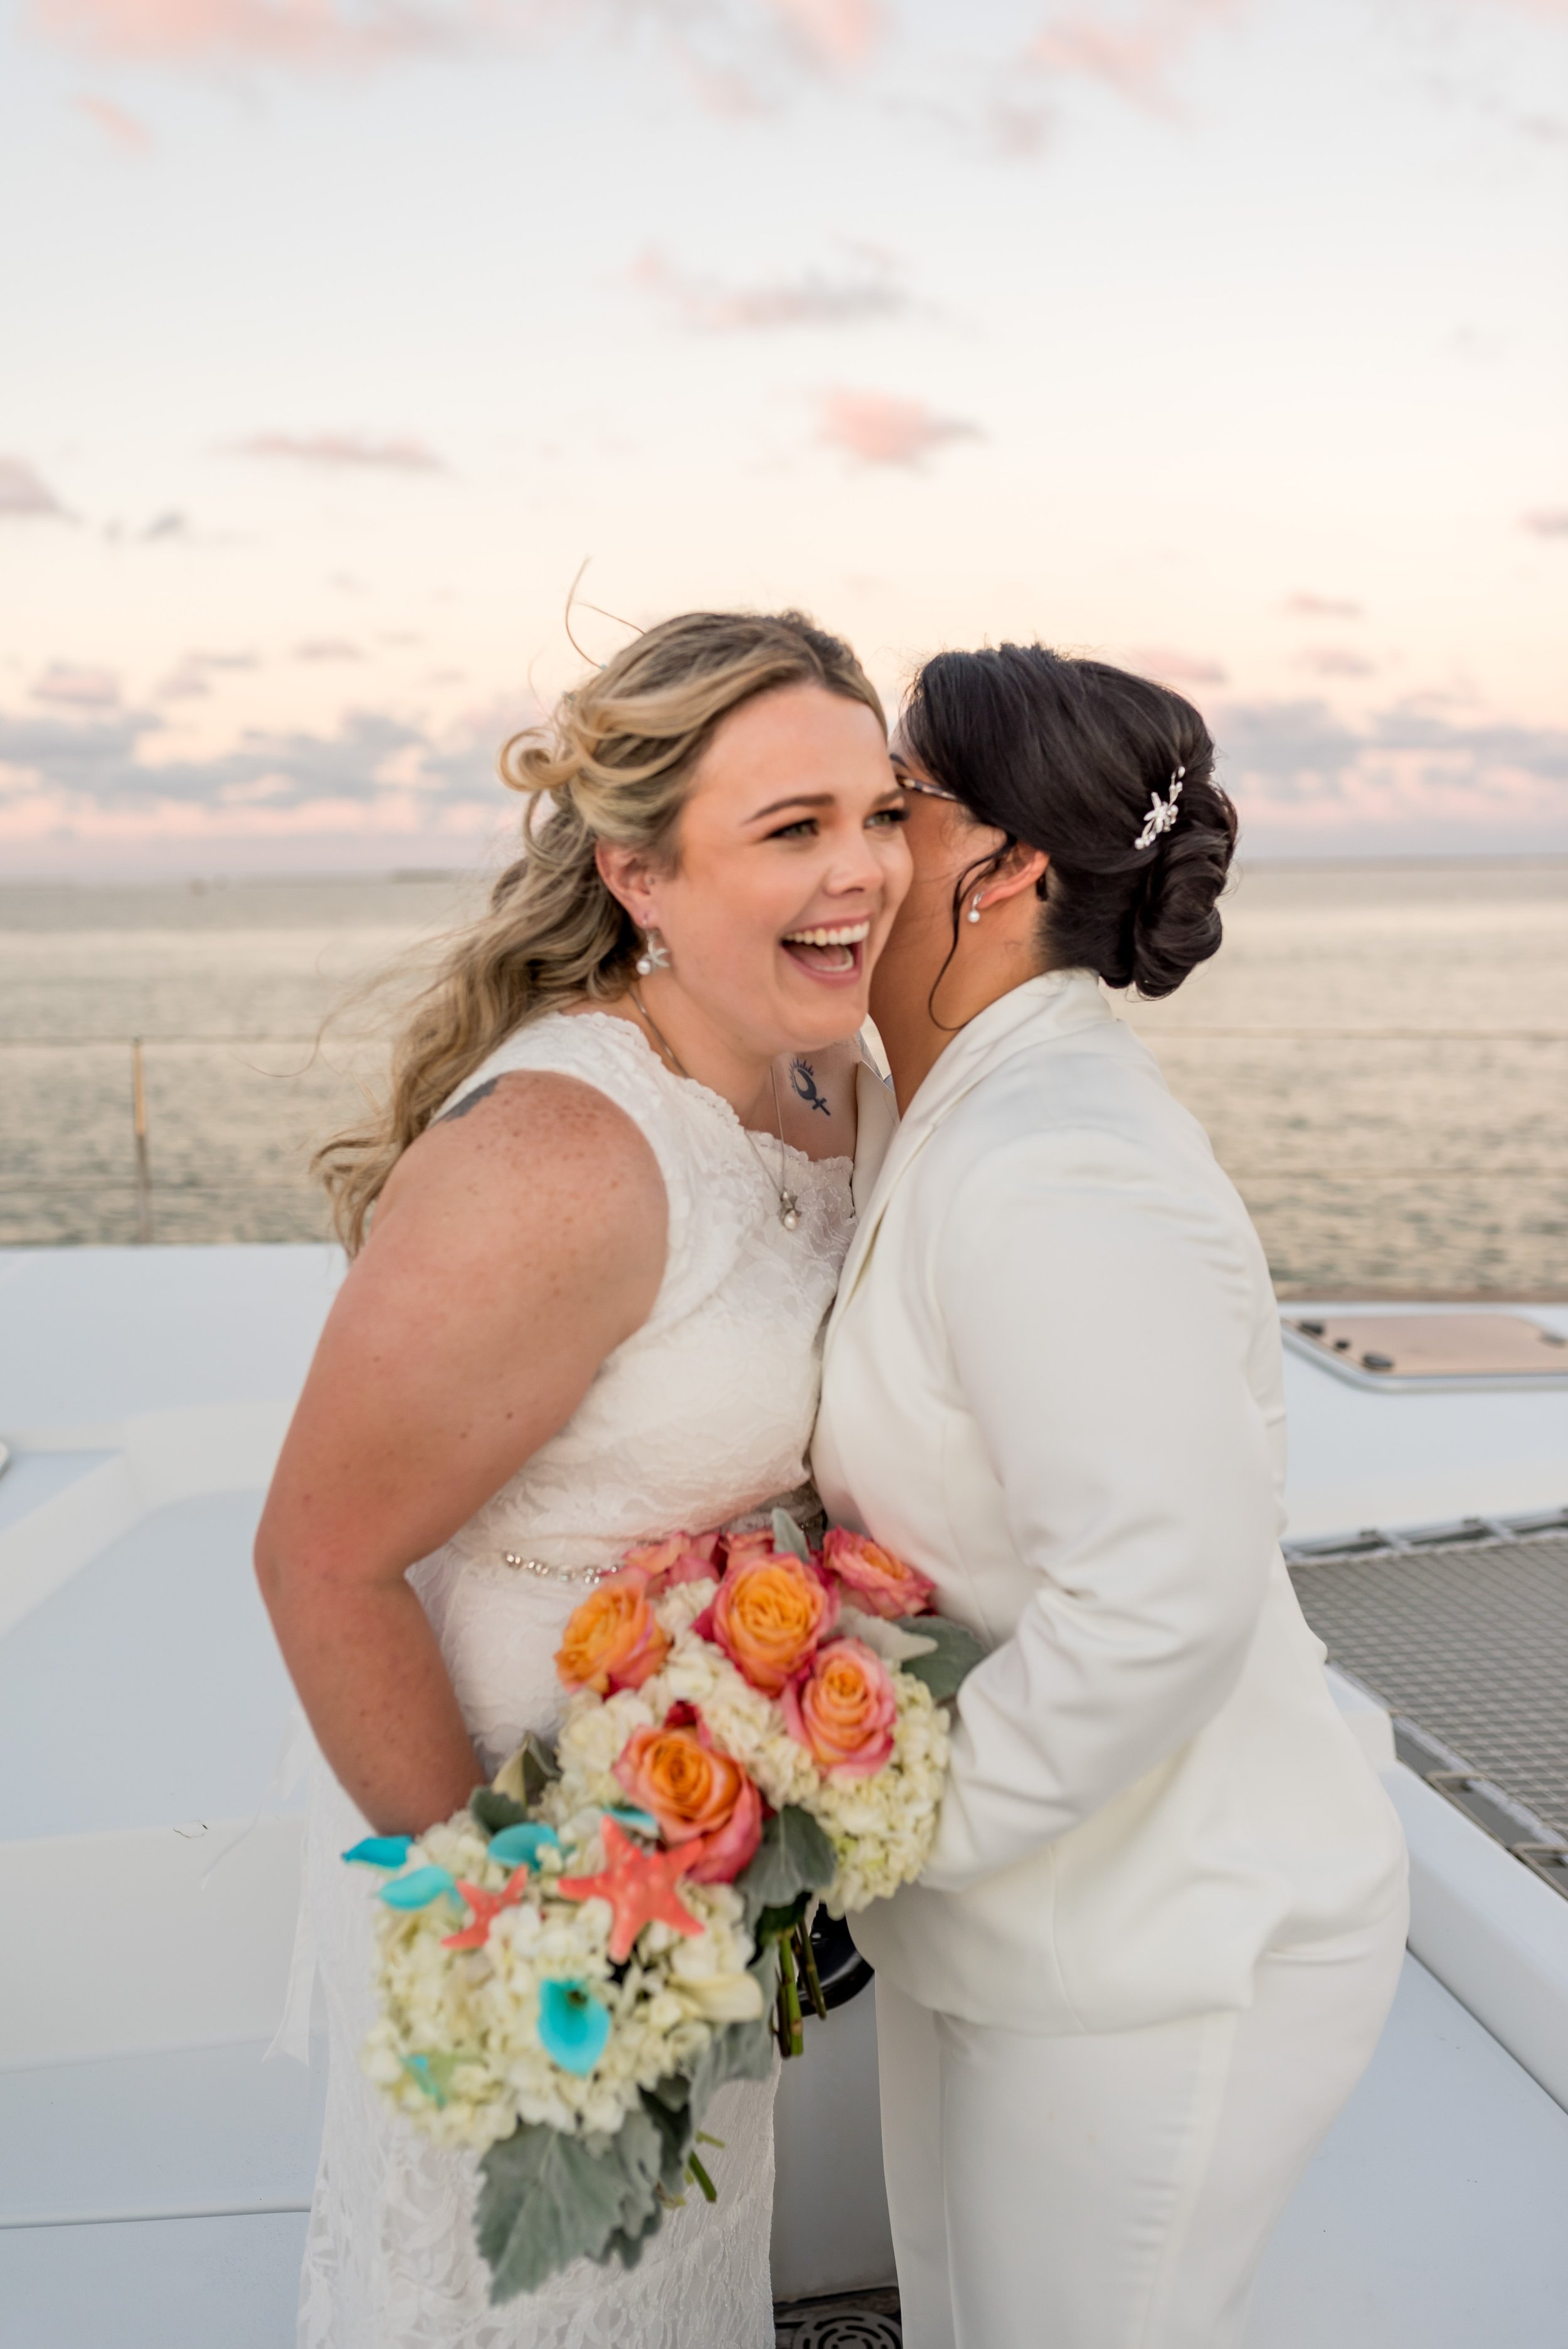 LGBTQIA+ wedding at Texas Event Center At Mansion By The Sea performed by The Love Officiant Renee Reyes